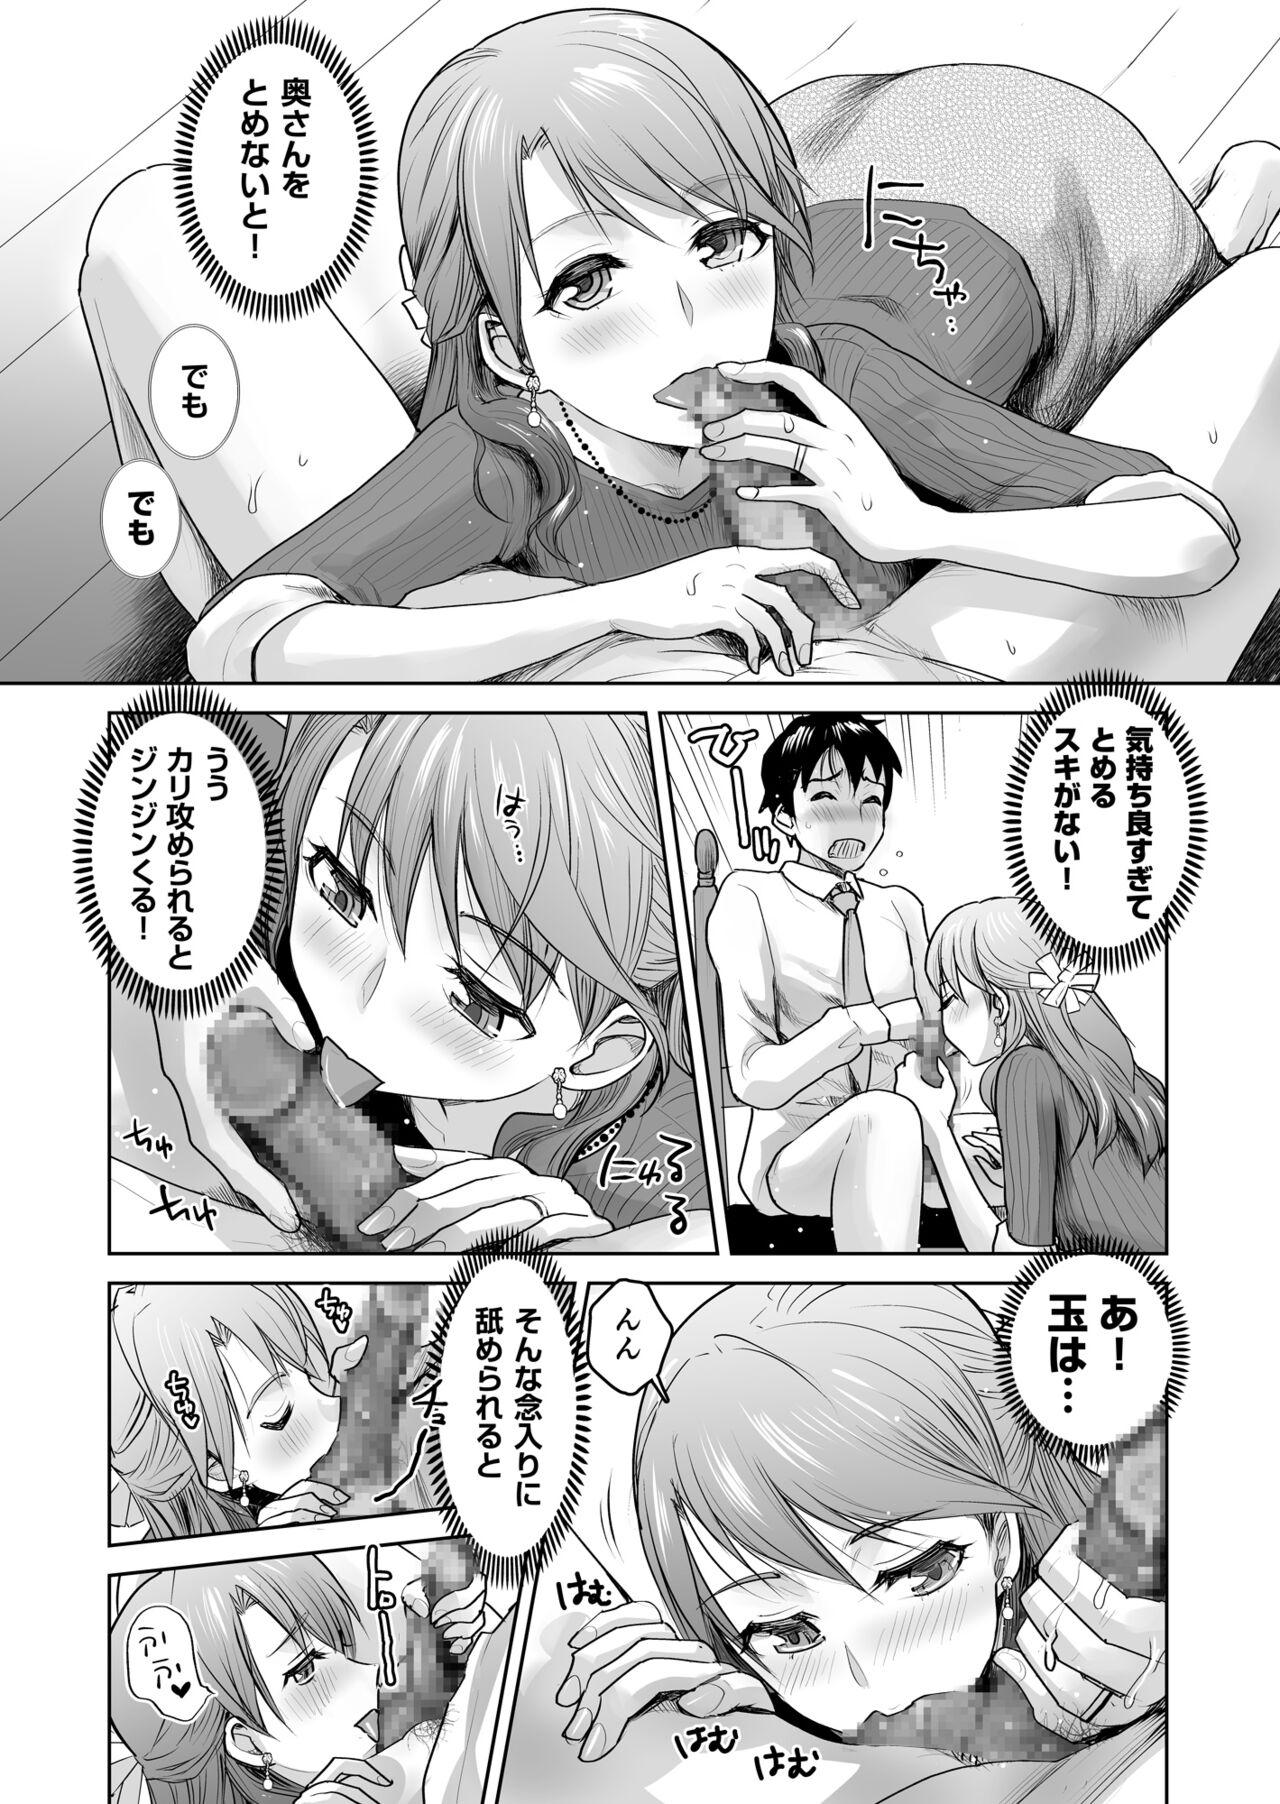 Invited by the boss! A threesome feast of sexual frenzy!【R18】 7